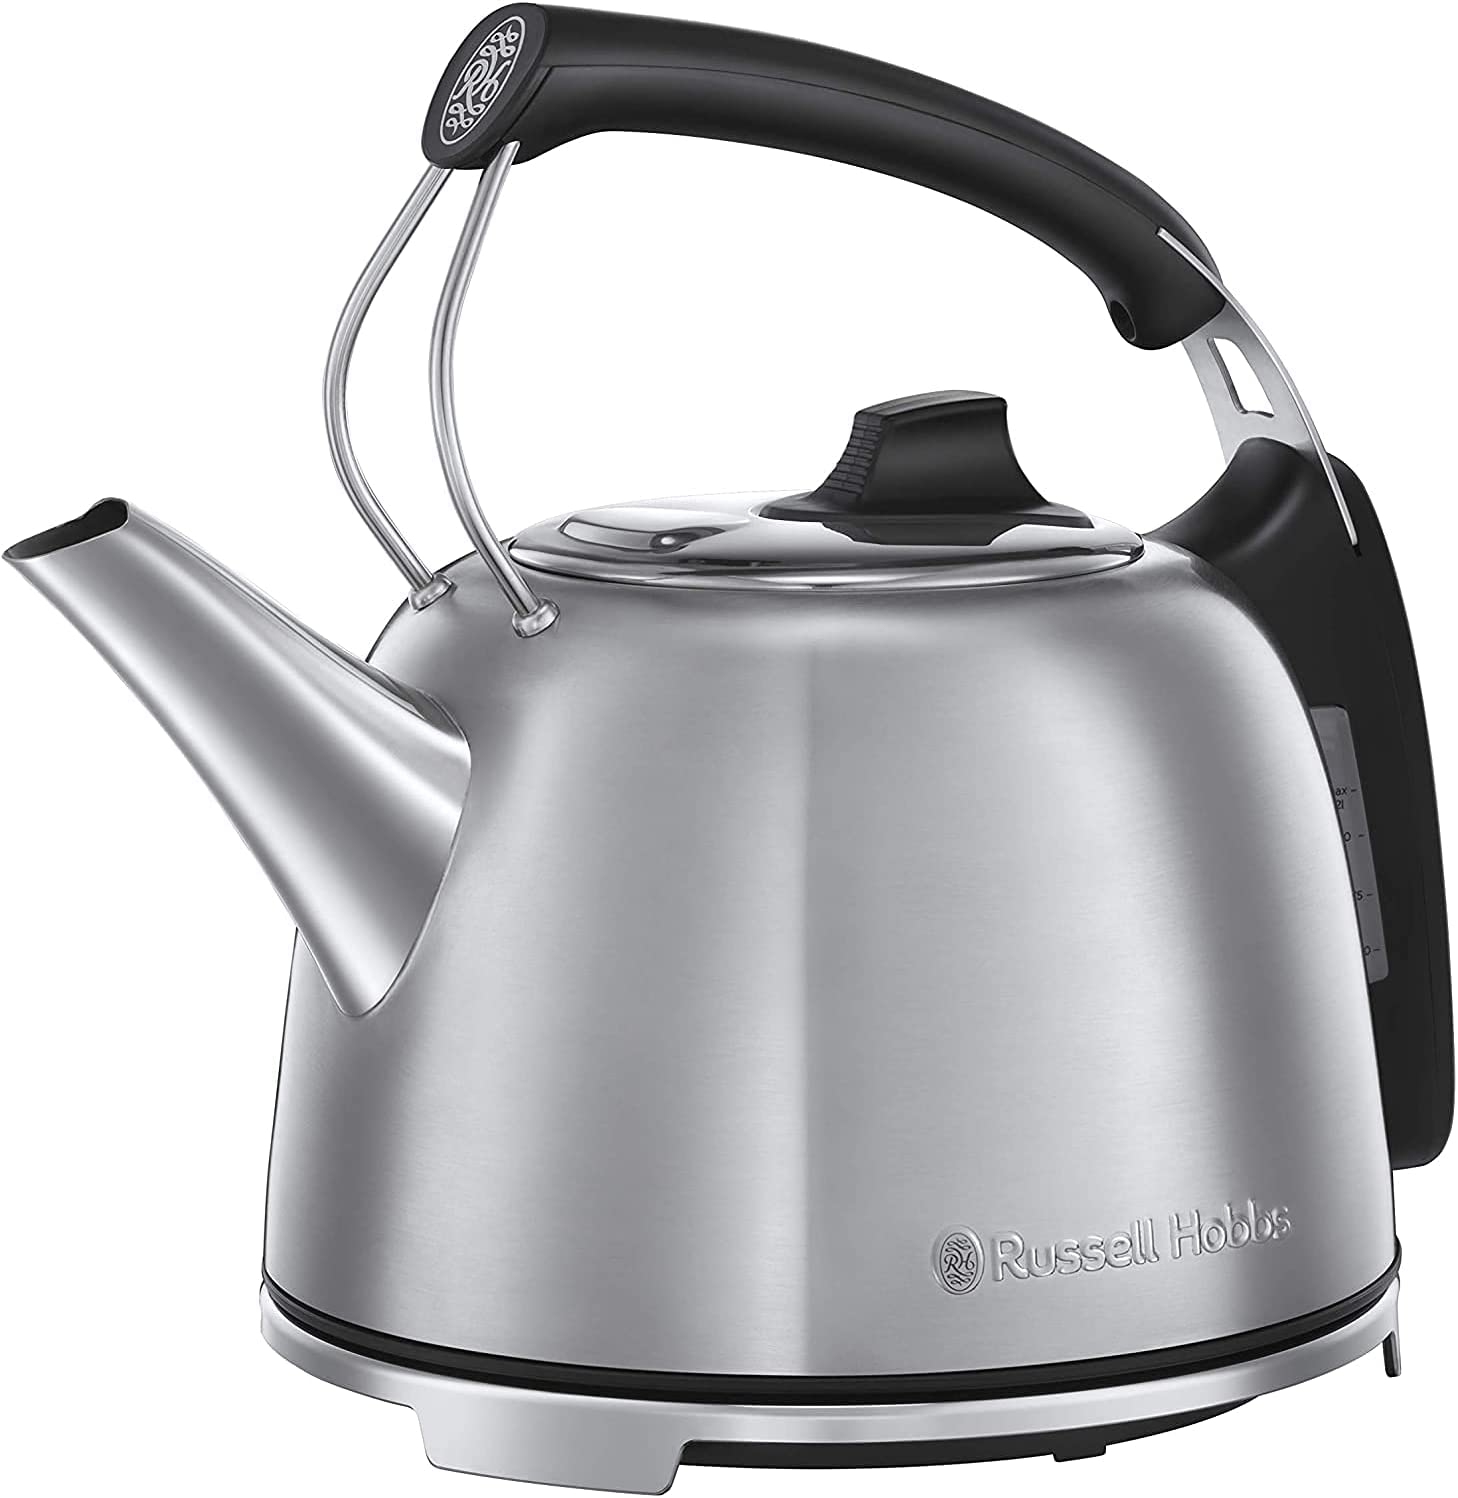 Russell Hobbs Kettle Stainless Steel Retro 65 Year Anniversary Model, 1.2 L, 2400 W, Quick Boil Function, Perfect Pour Spout Spout, Water Level Indicator, Vintage Tea Maker 25860-70